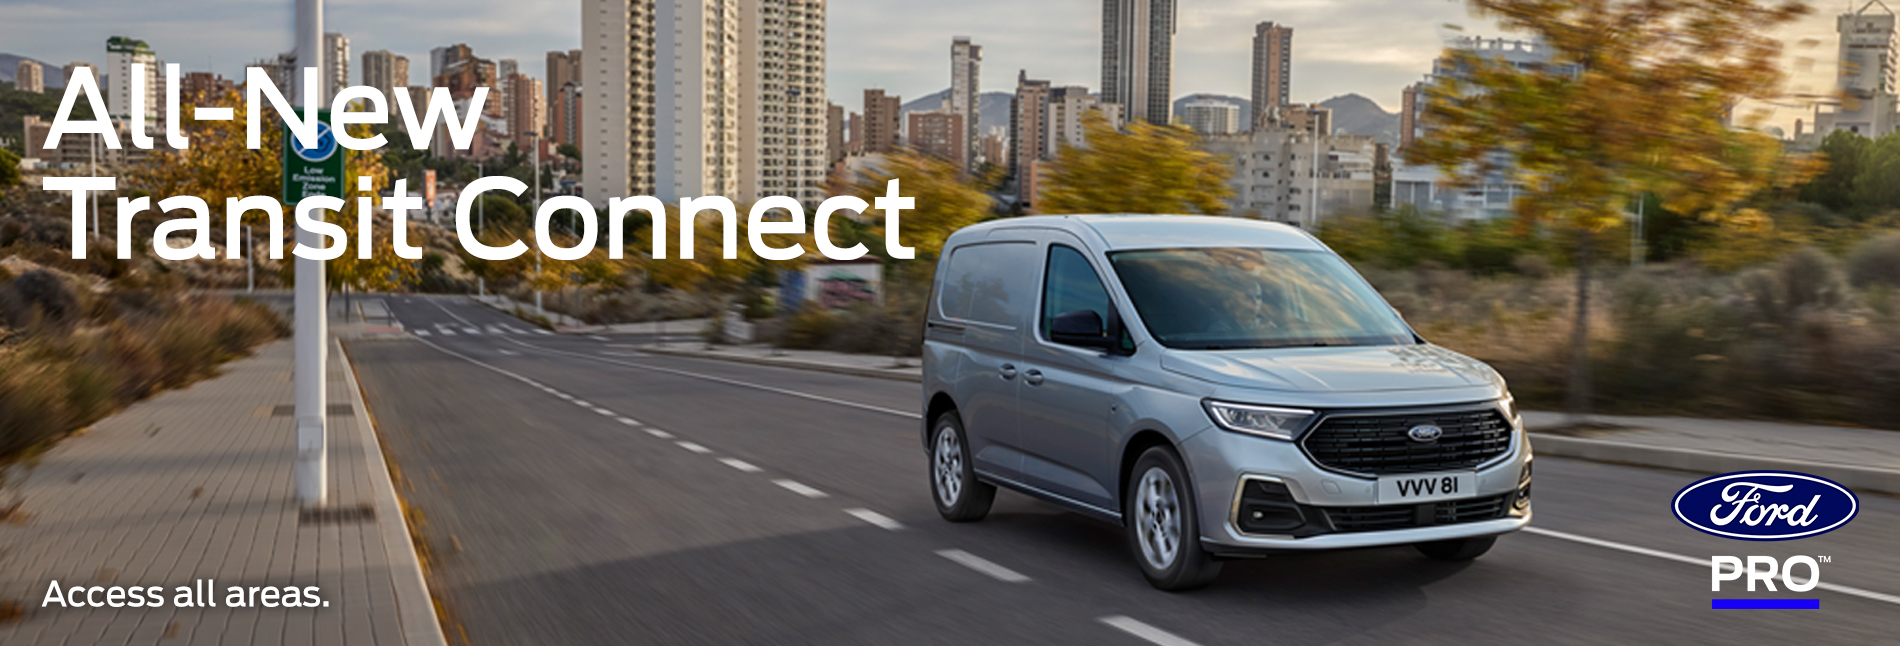 ALL-NEW FORD TRANSIT CONNECT